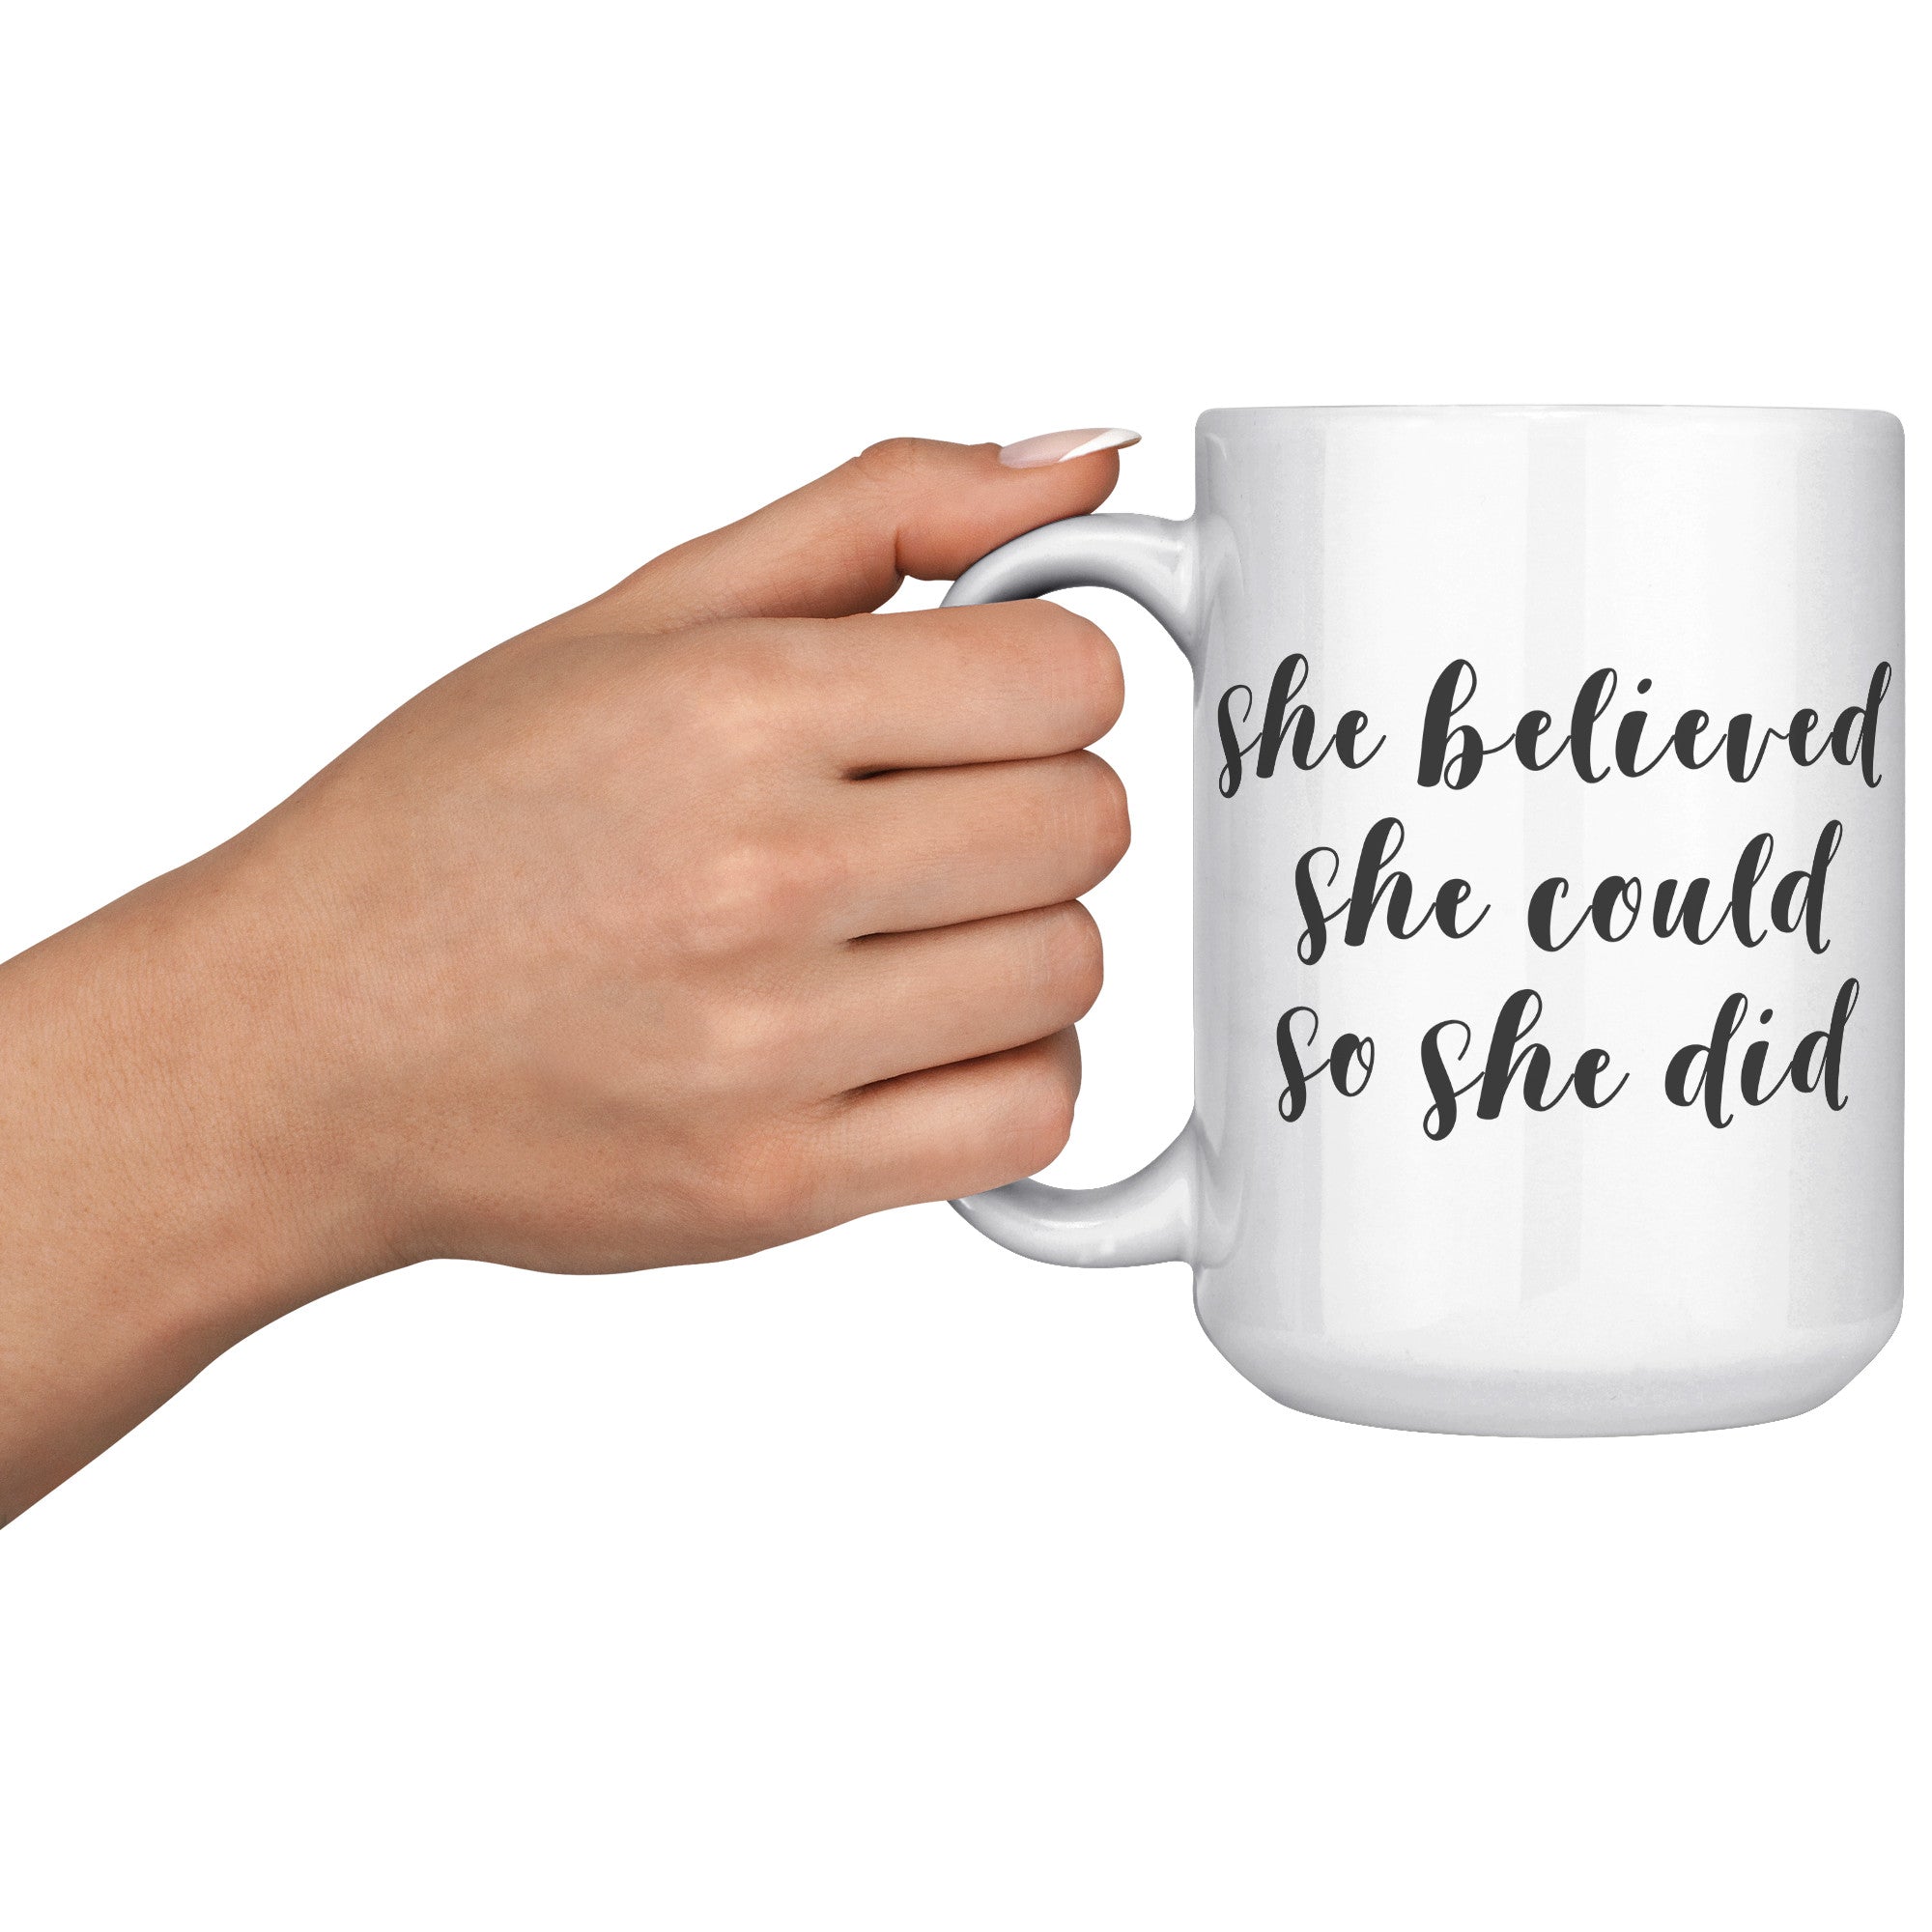 Female Runner Coffee Mug - Inspirational Running Quotes Cup - Perfect Gift for Women Runners - Motivational Marathoner's Morning Brew" - L1